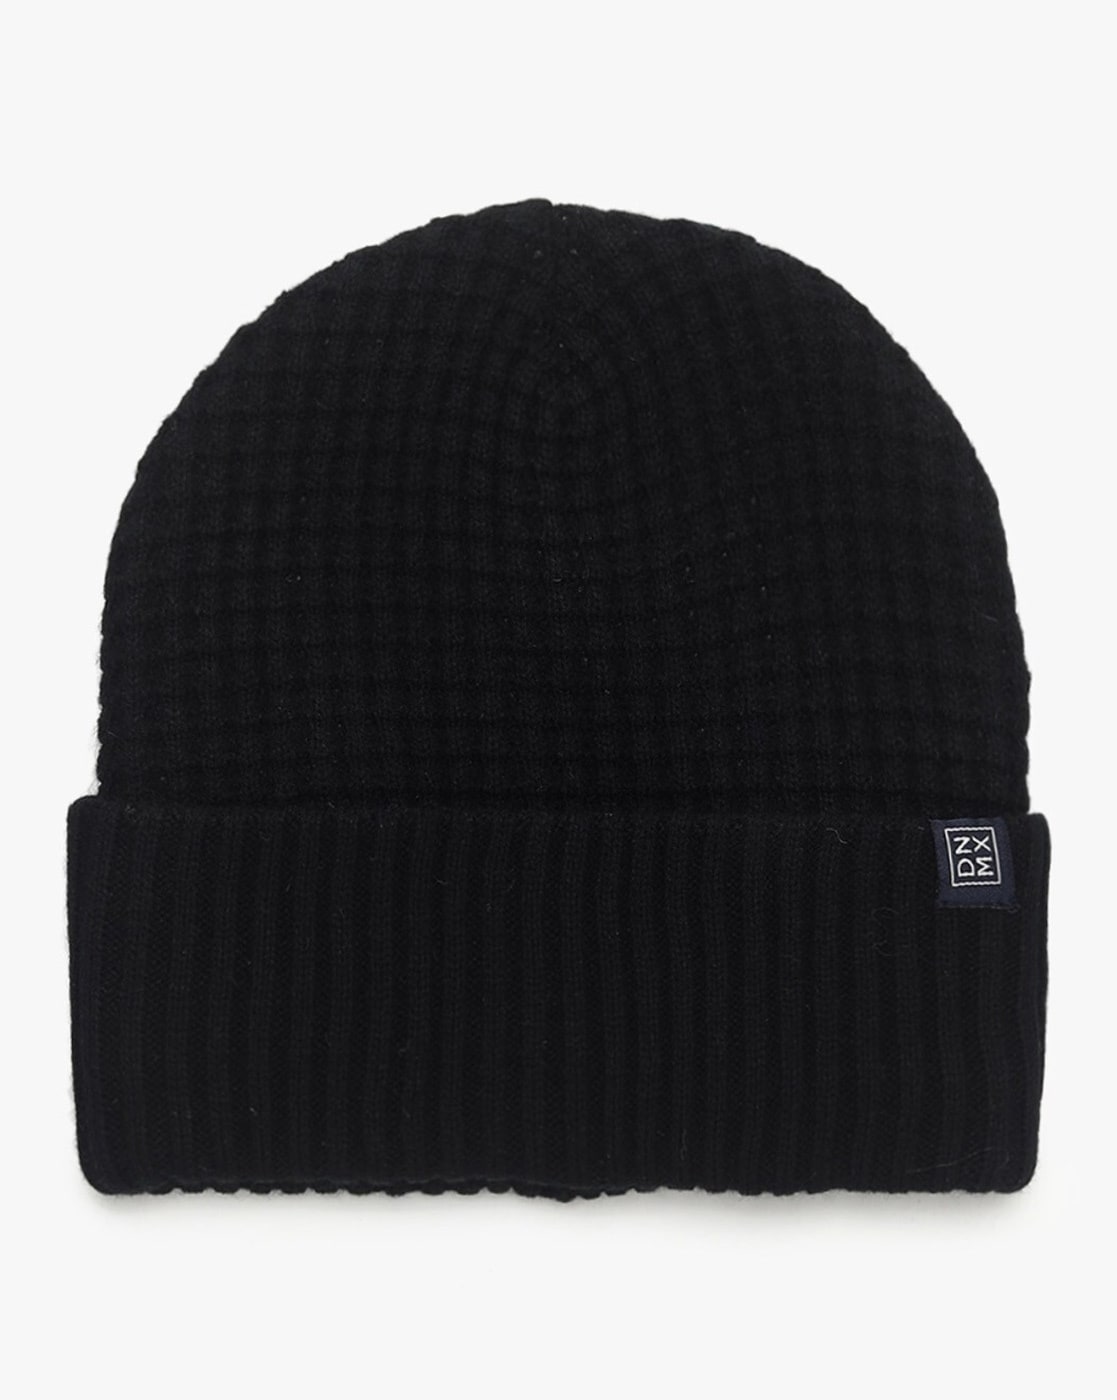 Upto 50% Off On Winter Caps, Beanie & Hats 